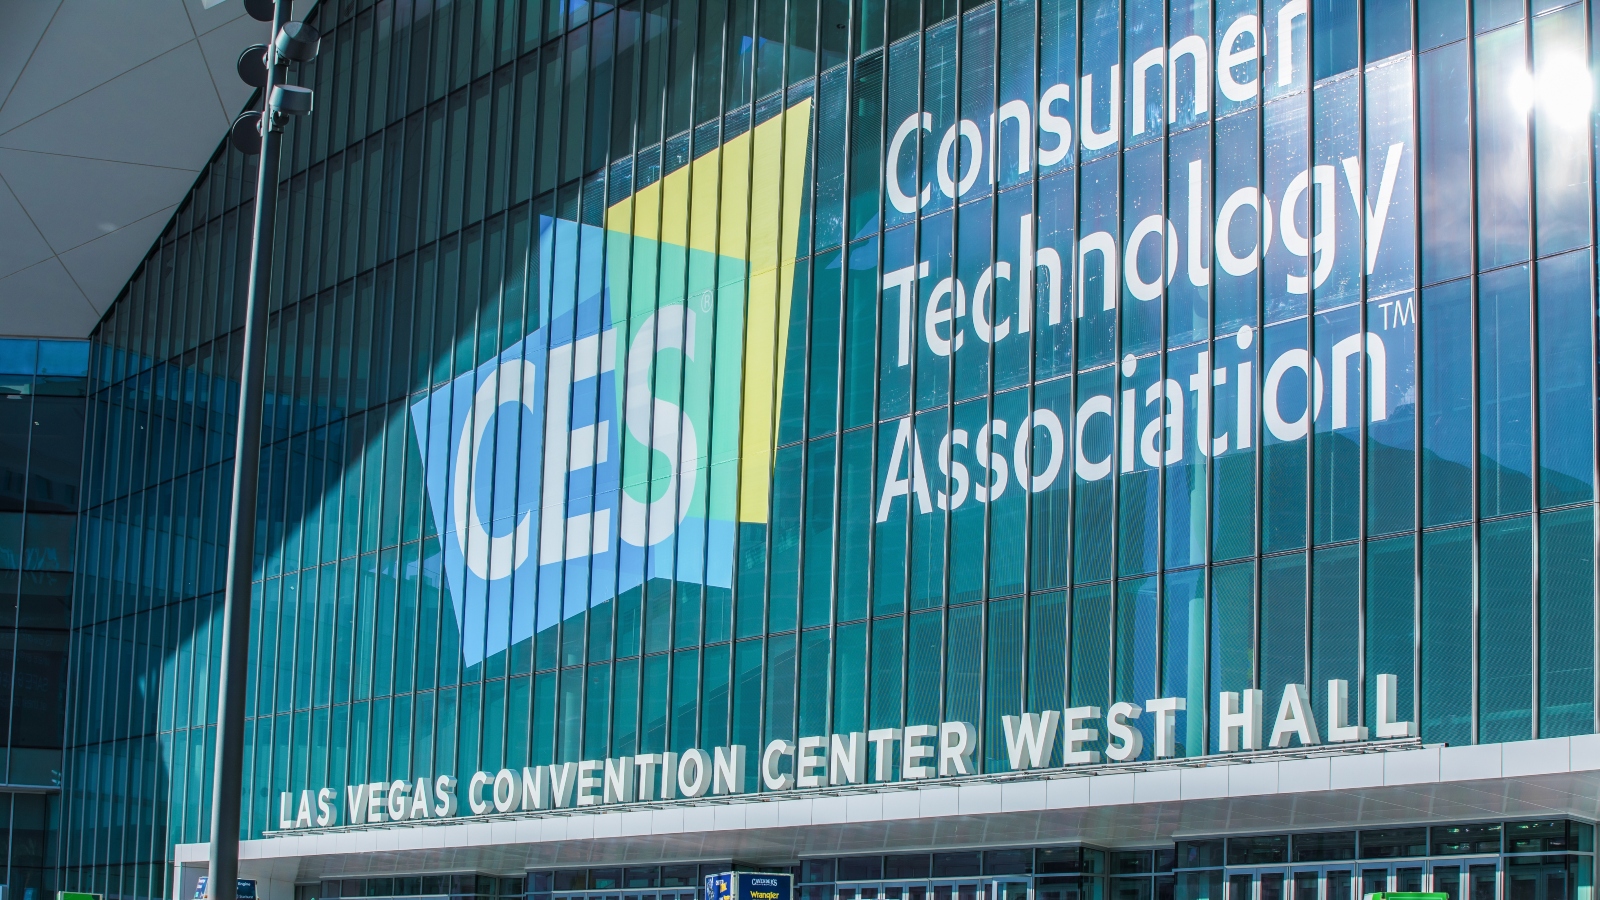 The Consumer Electronics Show at Las Vegas. Photo by RYO Alexandre, via Shutterstock